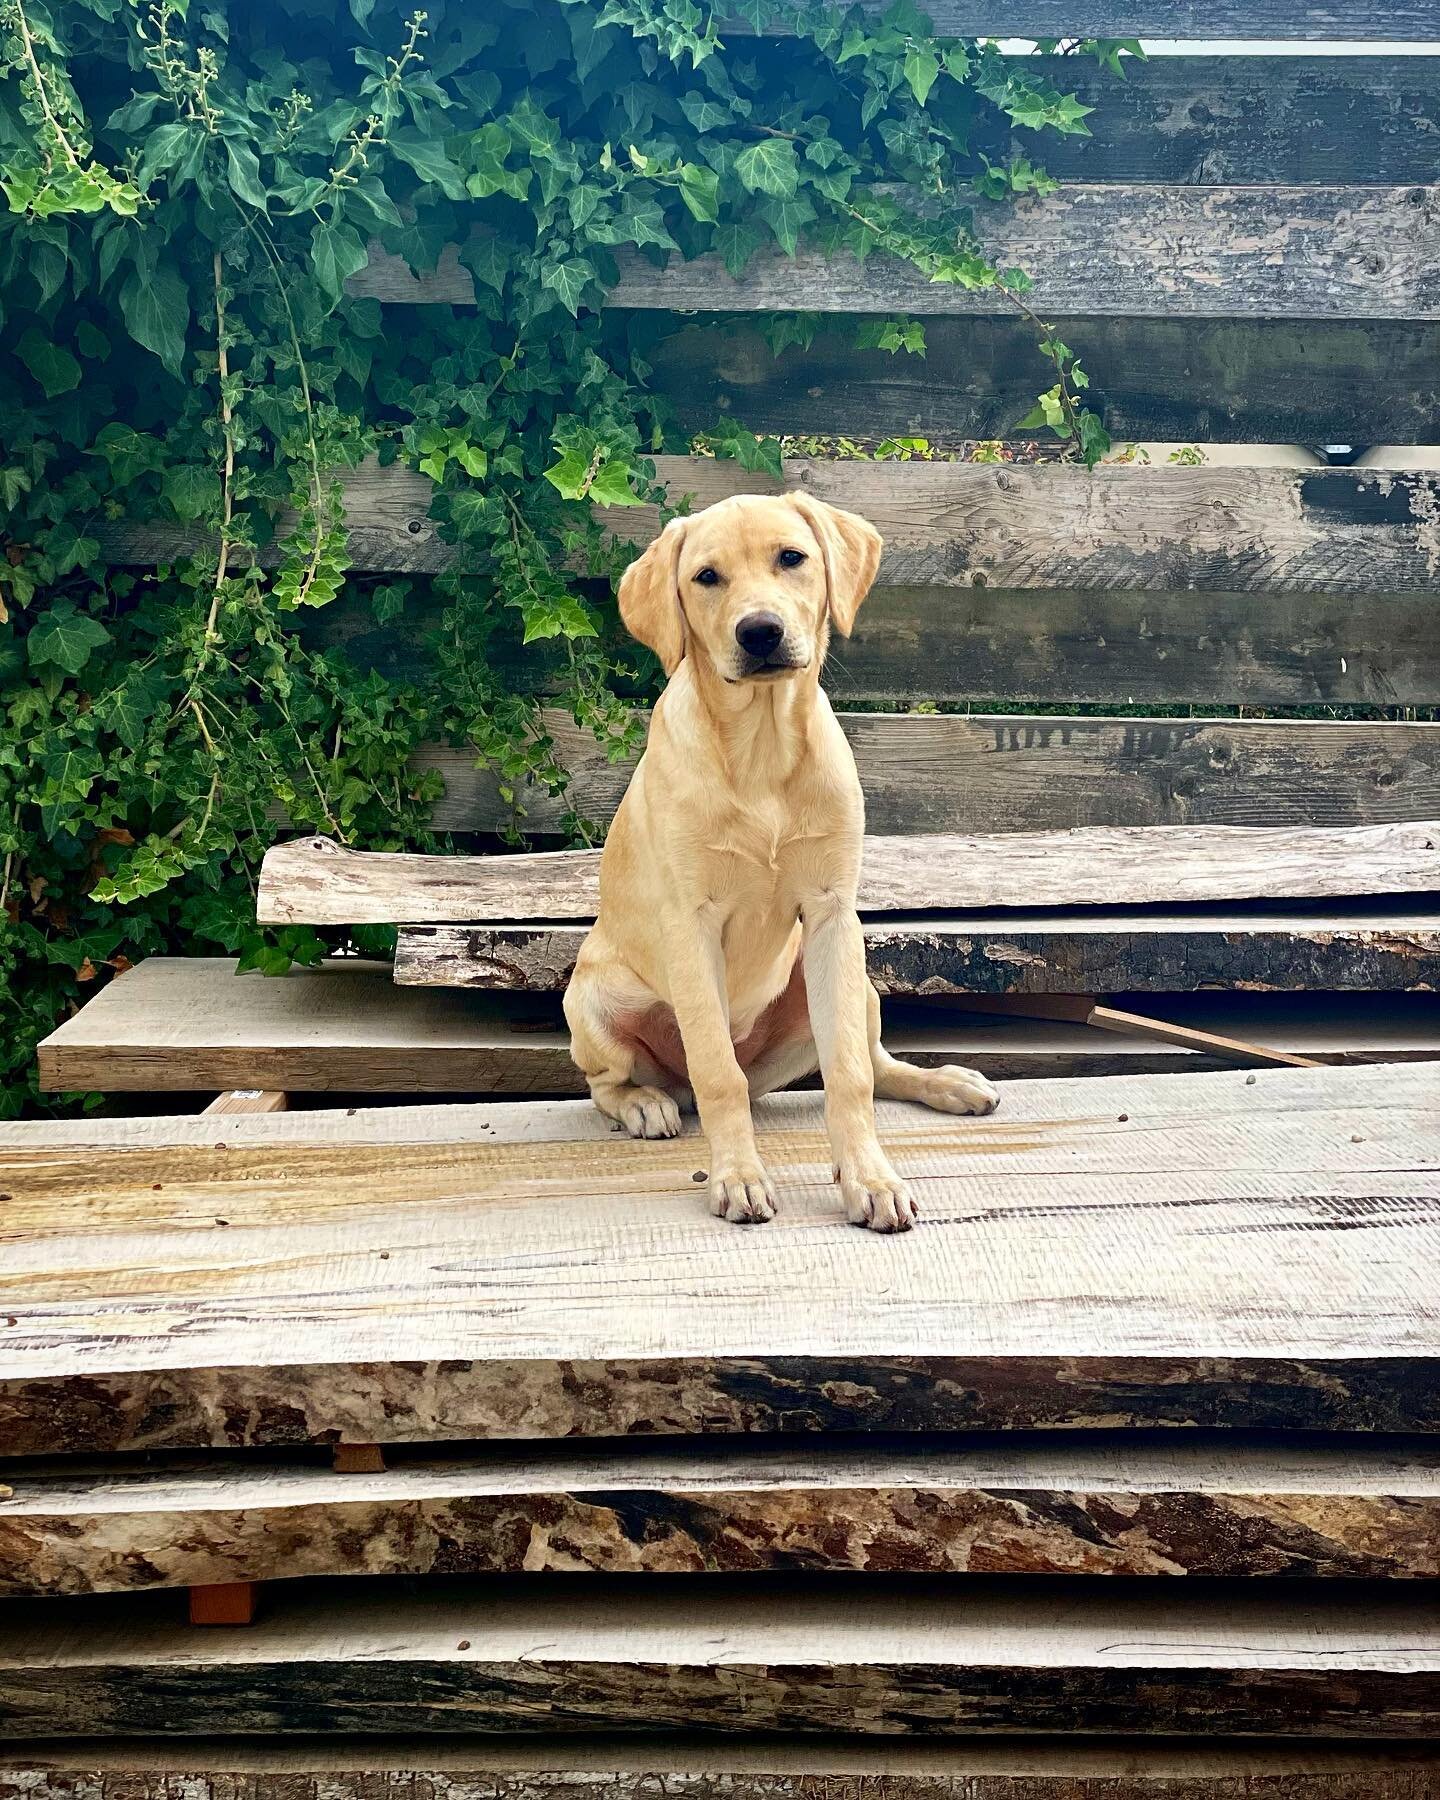 Guard dog on duty 🐶 our family dog Monty is keeping an eye on next year&rsquo;s supply of ash. This wood is so beautiful, with amazing live edge features and intricate grain details, we can&rsquo;t wait to turn it into something. What should we make